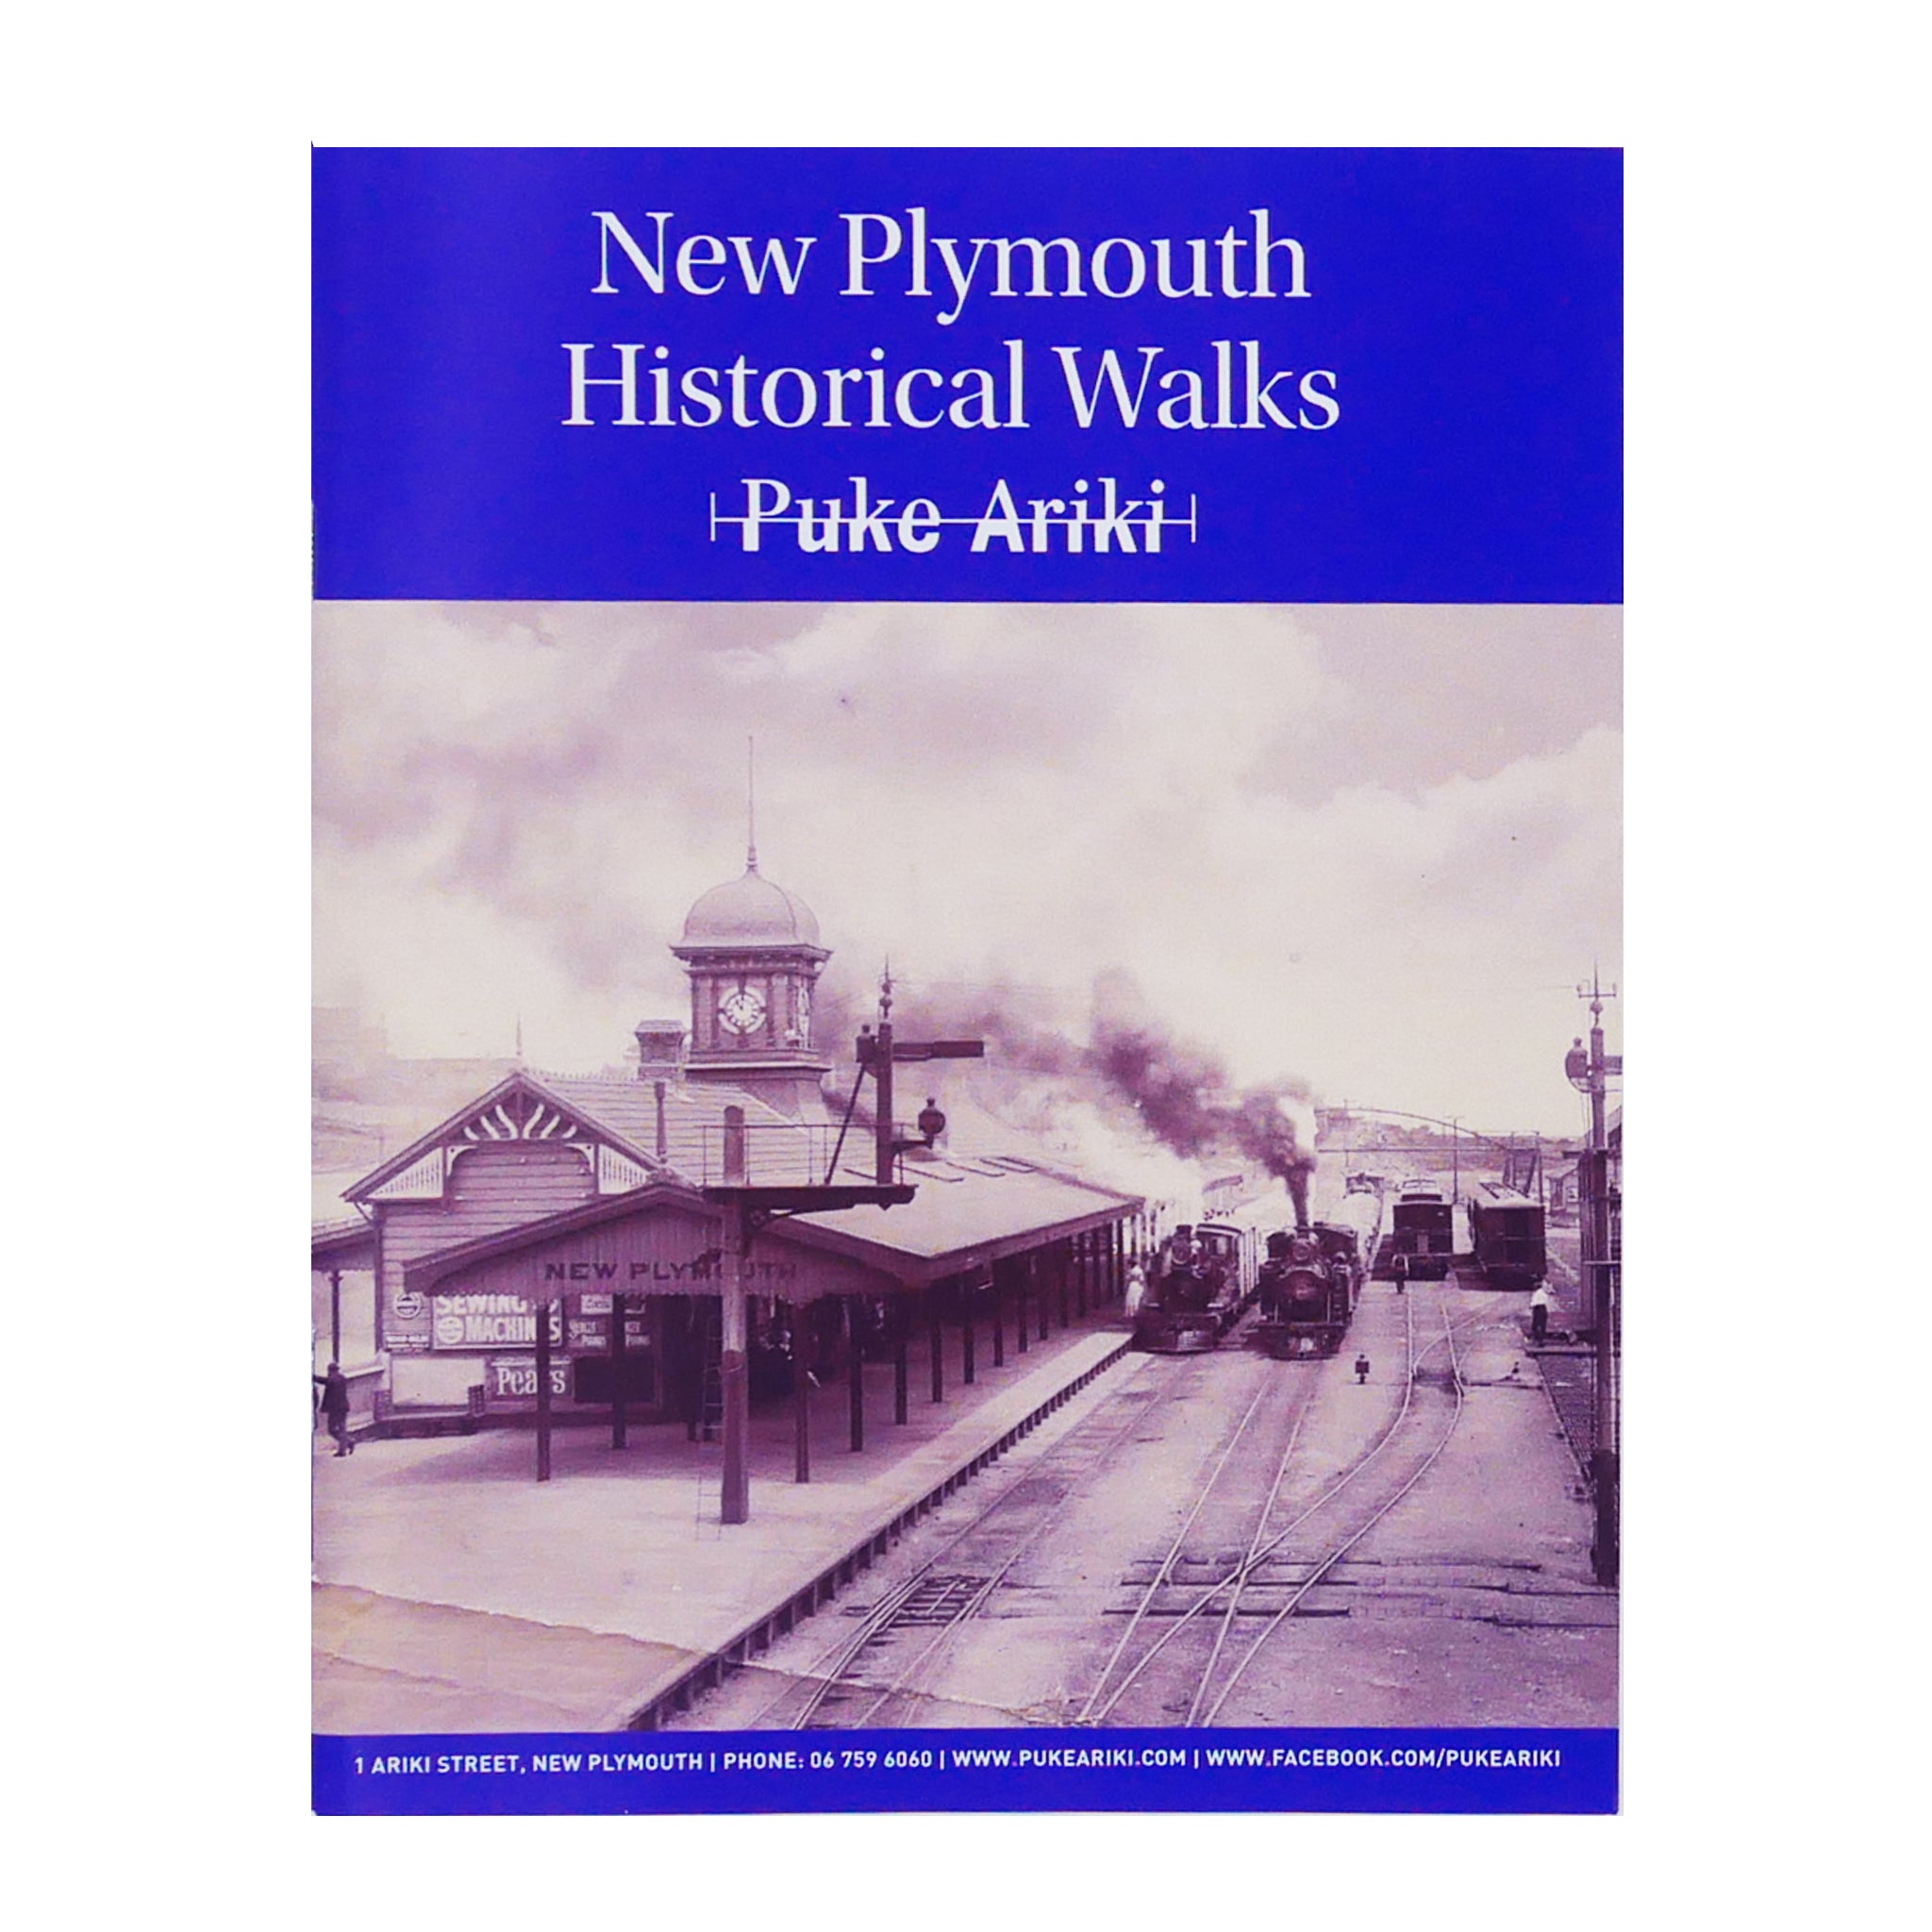 New Plymouth Historical Walks